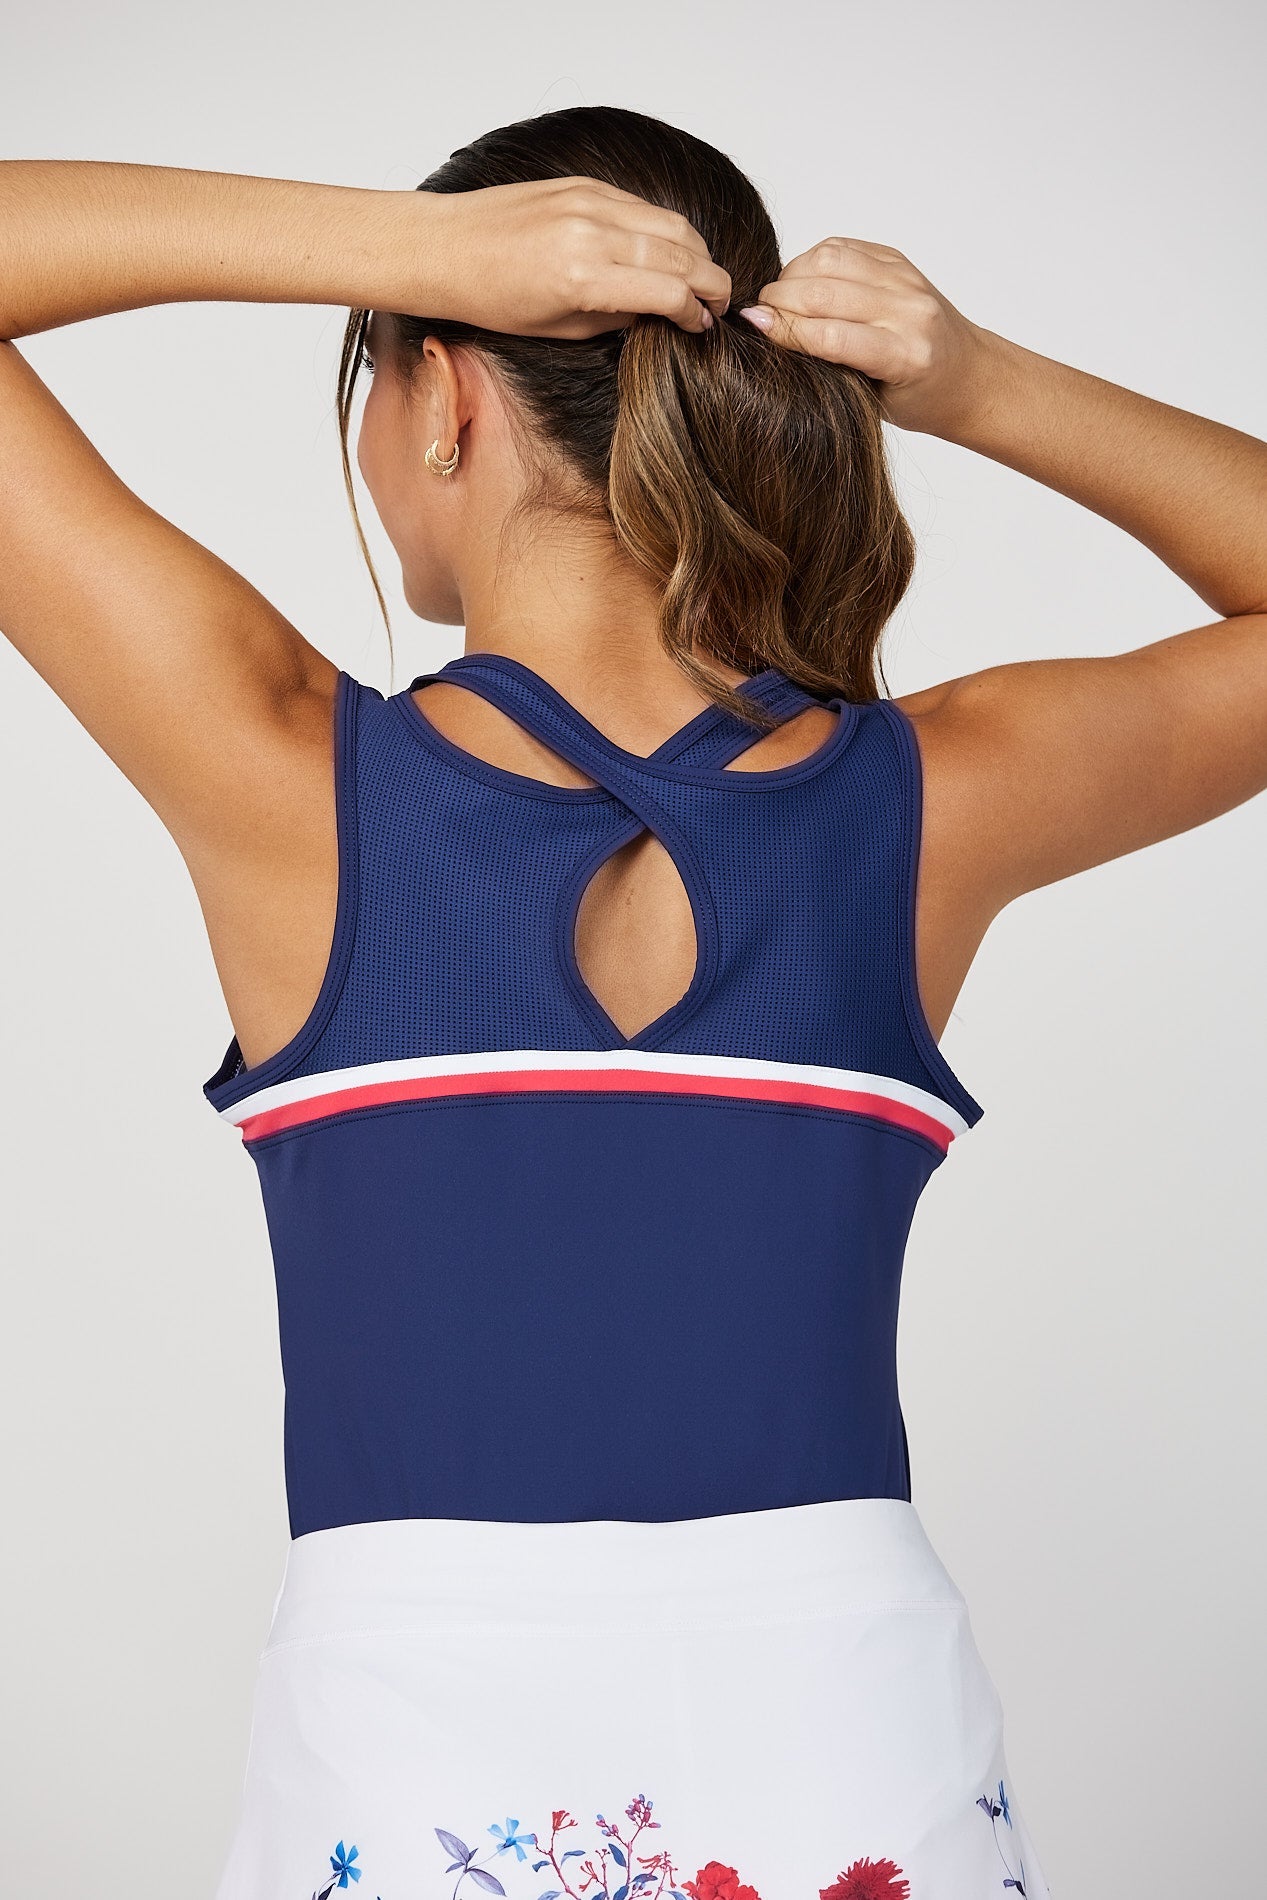 Women's Tennis Tank Top with Cross Back Detail by Sofibella, navy, close up of back